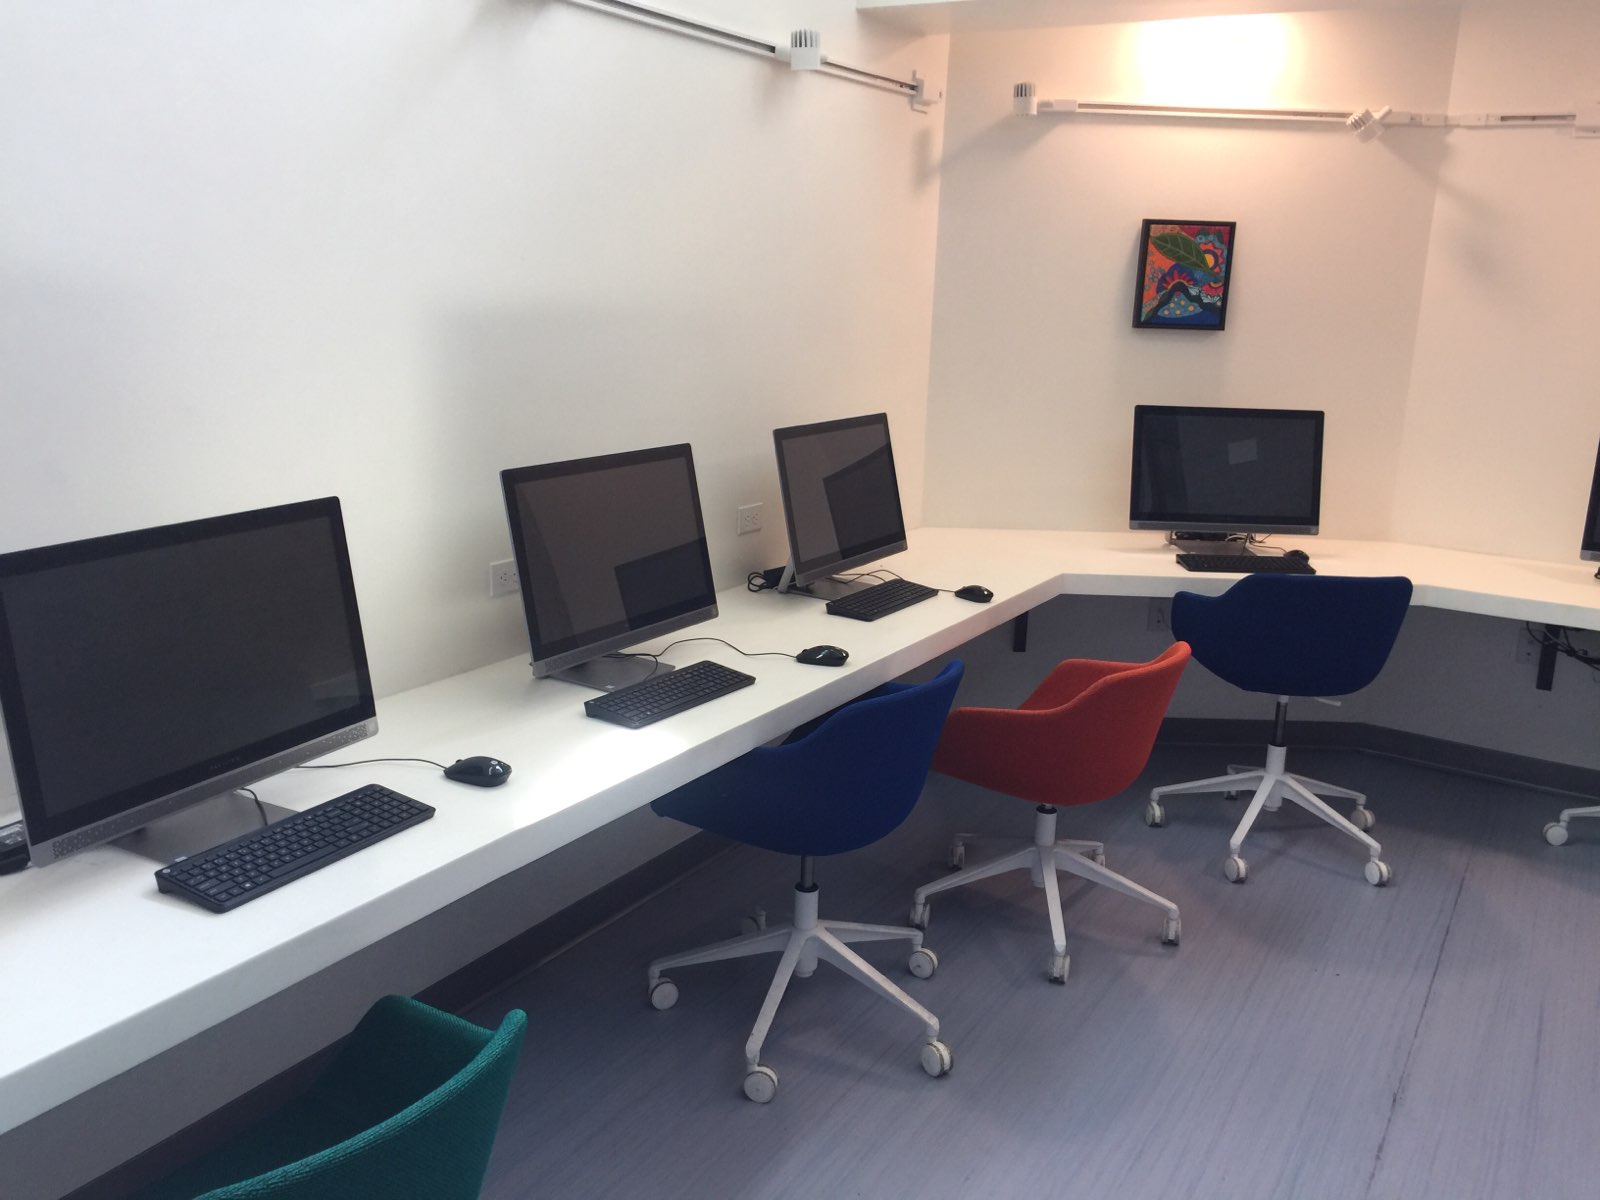 Computer room with multiple desktops, different colored rolling computer chairs, a small painting on the wall.